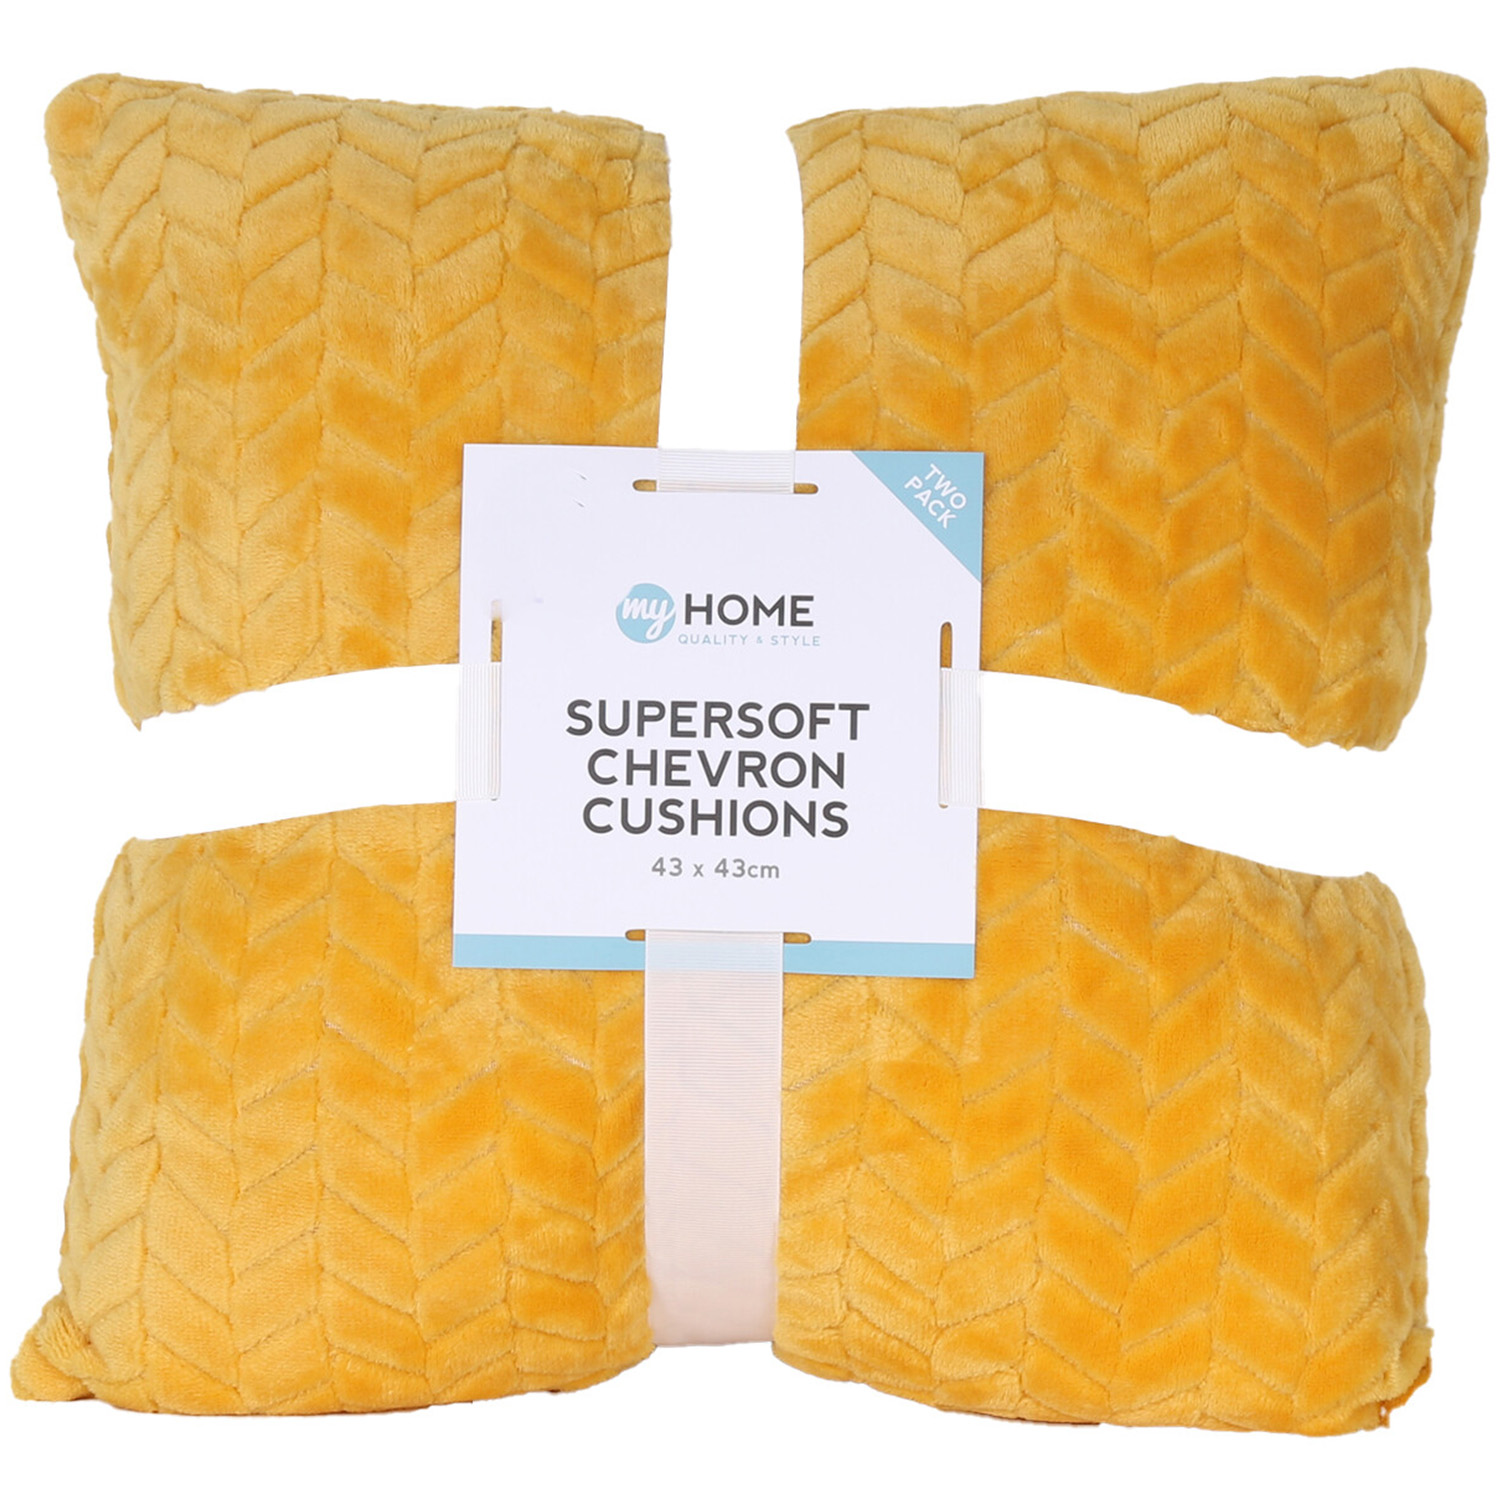 My Home Ochre Supersoft Chevron Cushions 2 Pack Image